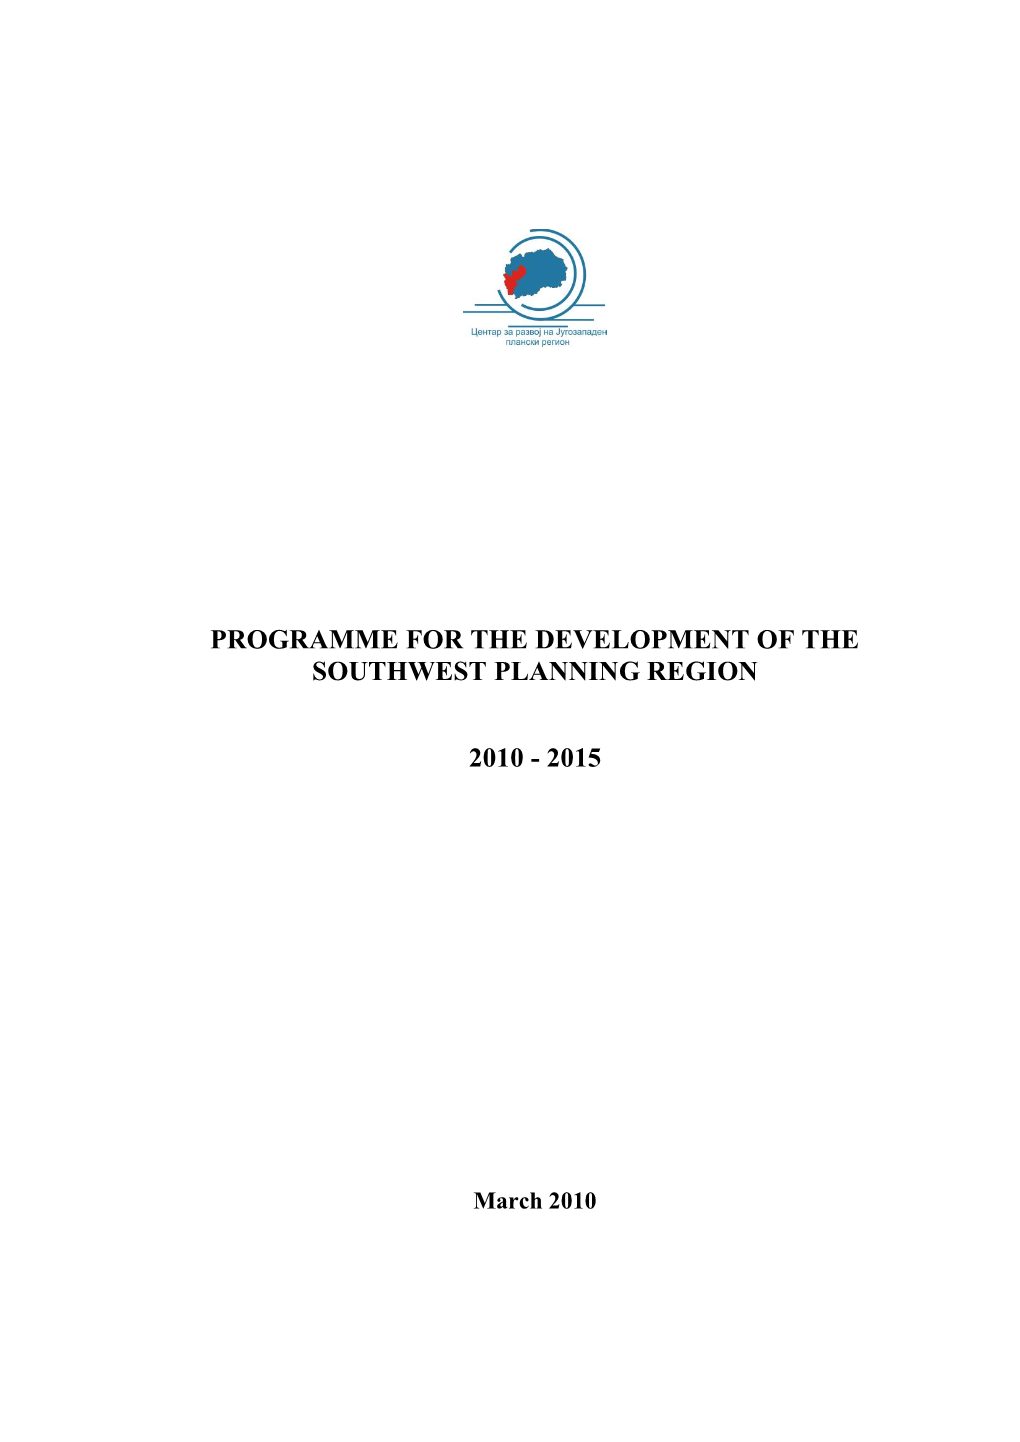 Programme for the Development of the Southwest Planning Region